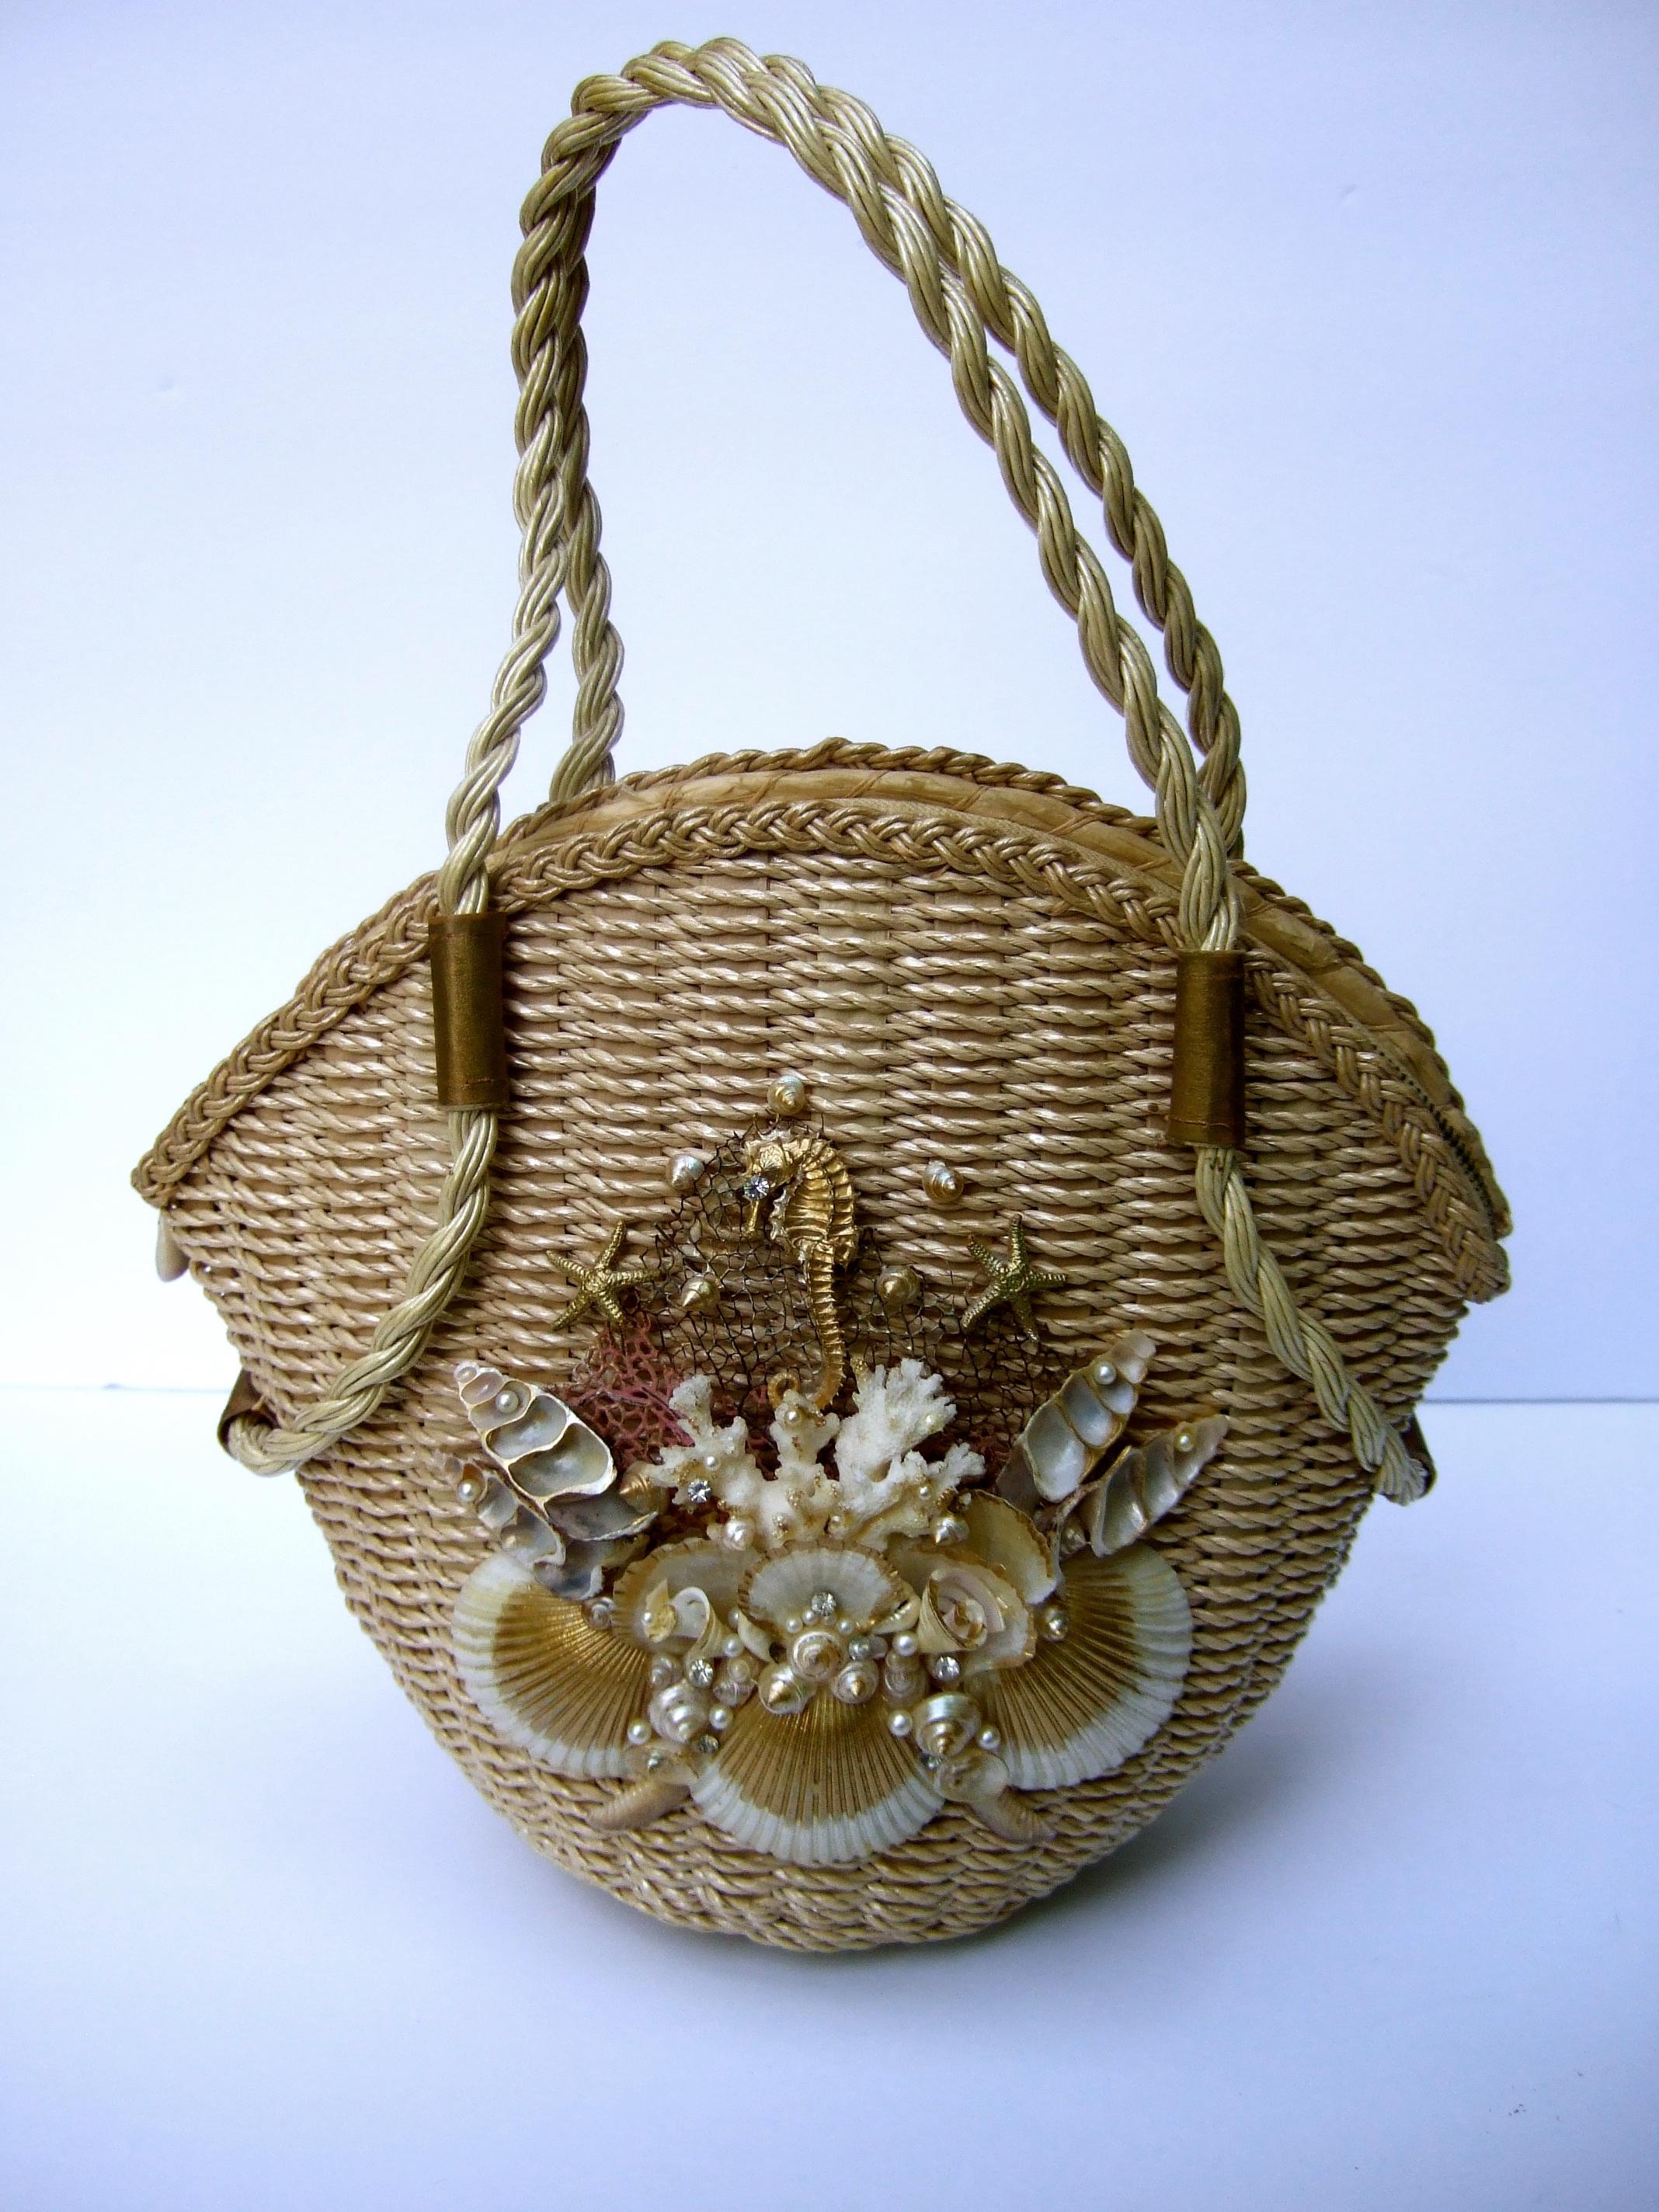 Charming Handmade Artisan Sea Life Woven Wicker Rope Summer Handbag c 1970 In Good Condition For Sale In University City, MO